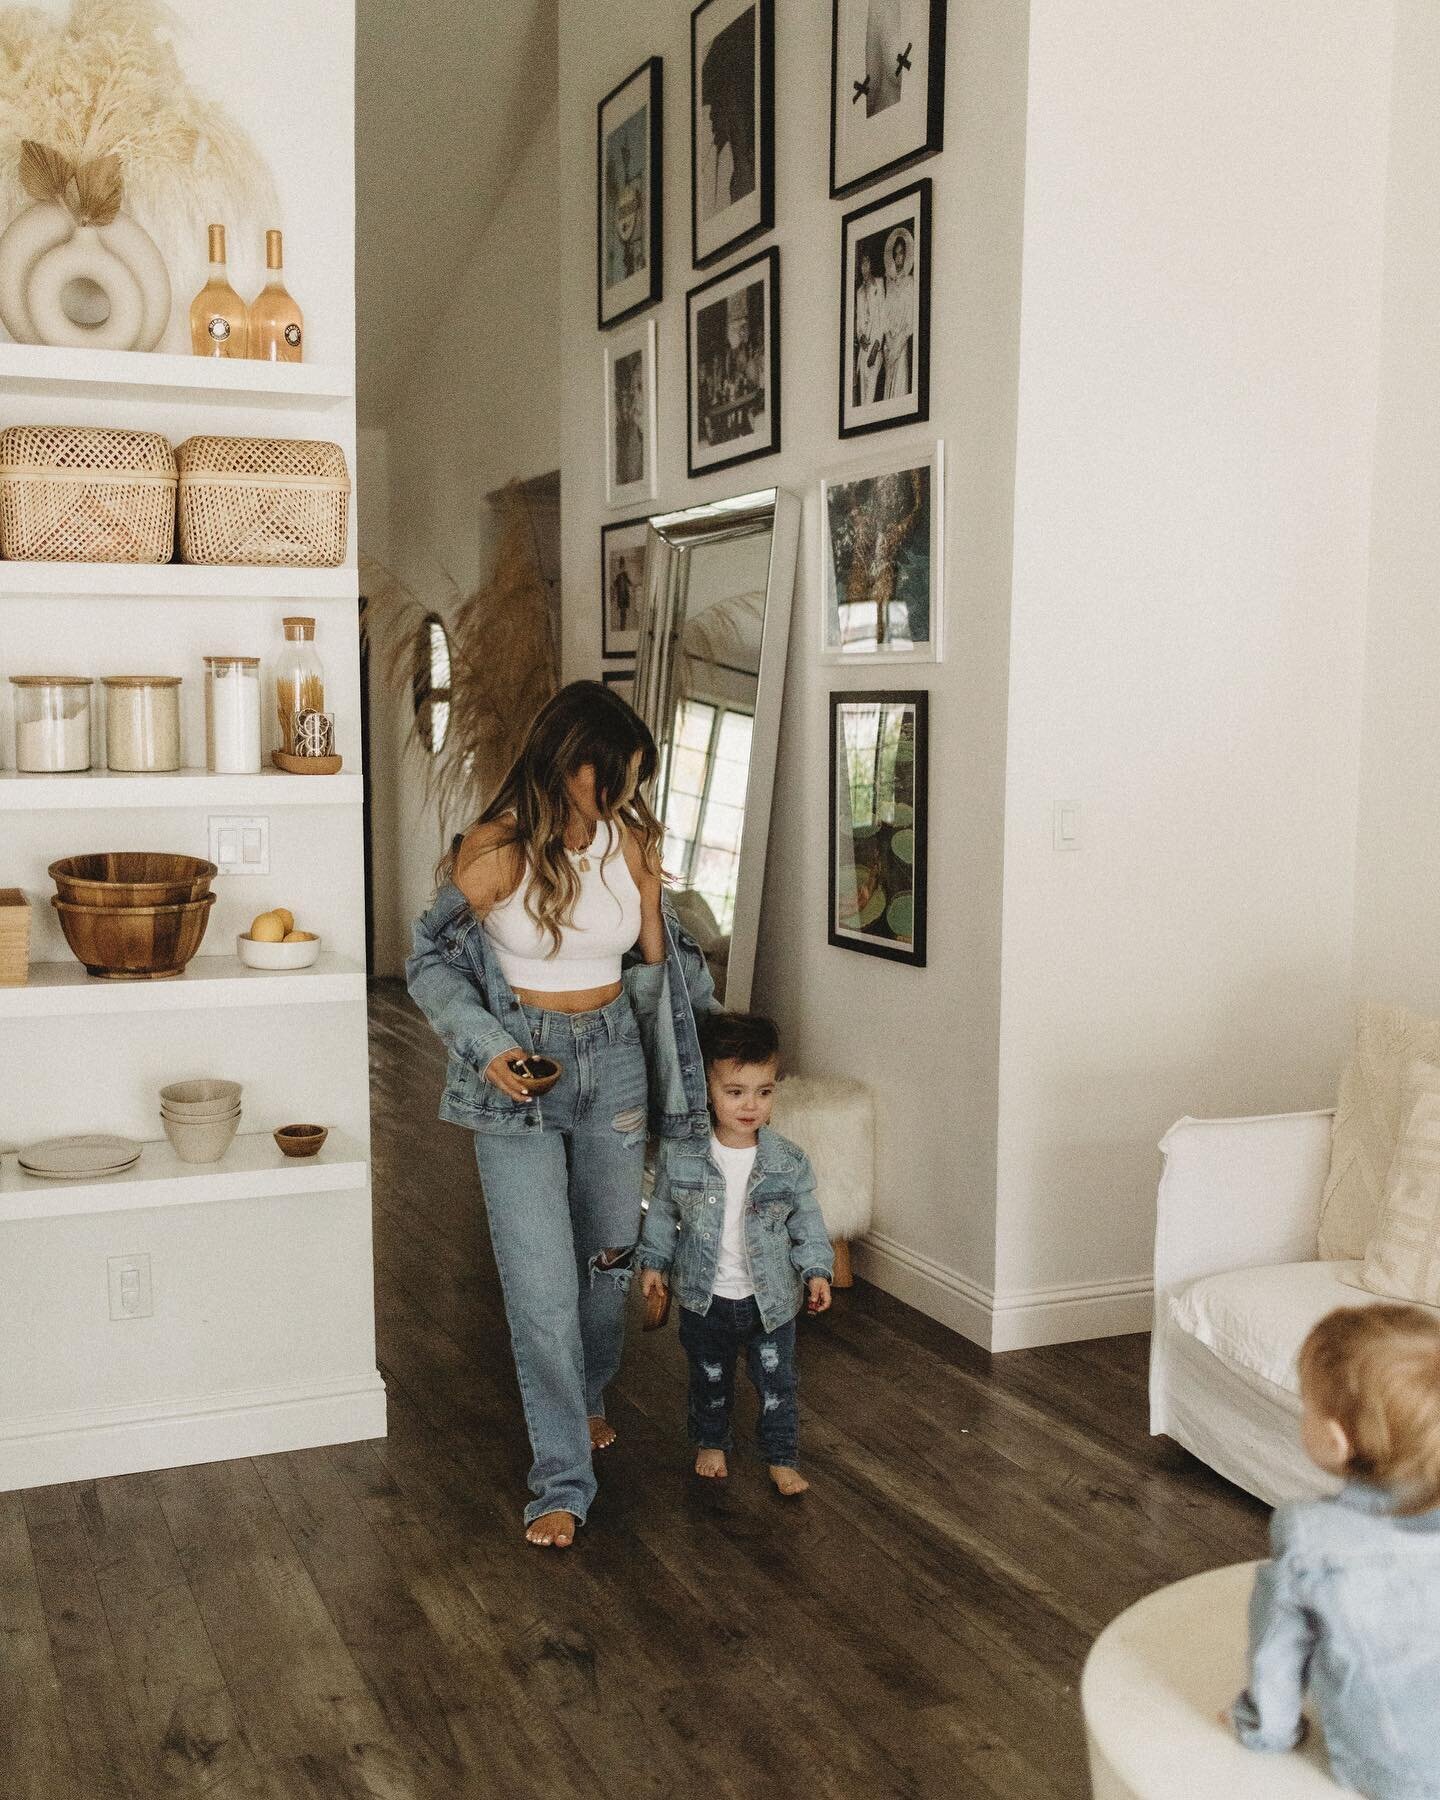 A woman in denim holding hands with a toddler in a stylish home. they walk towards a sitting baby, surrounded by shelves, framed photos, and cozy decor.